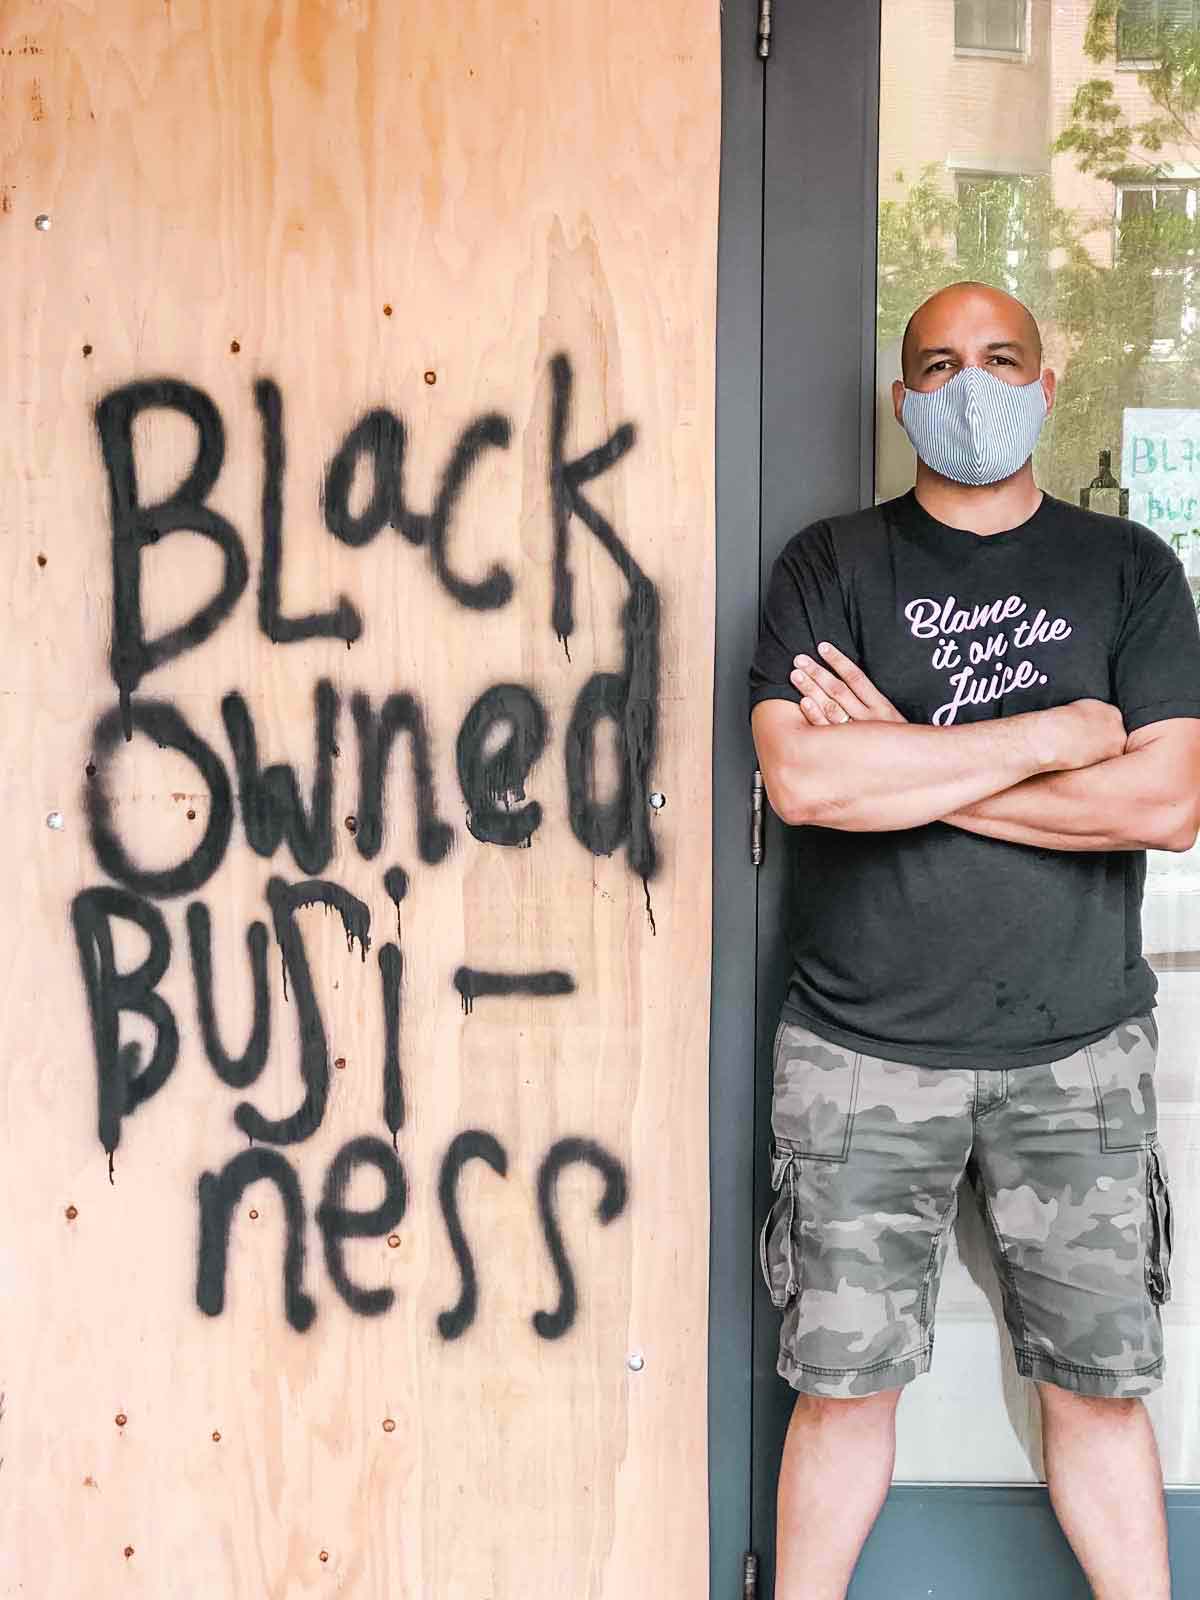 TJ Douglas standing beside a piece of plywood spray-painted with 'Black Owned Business'.